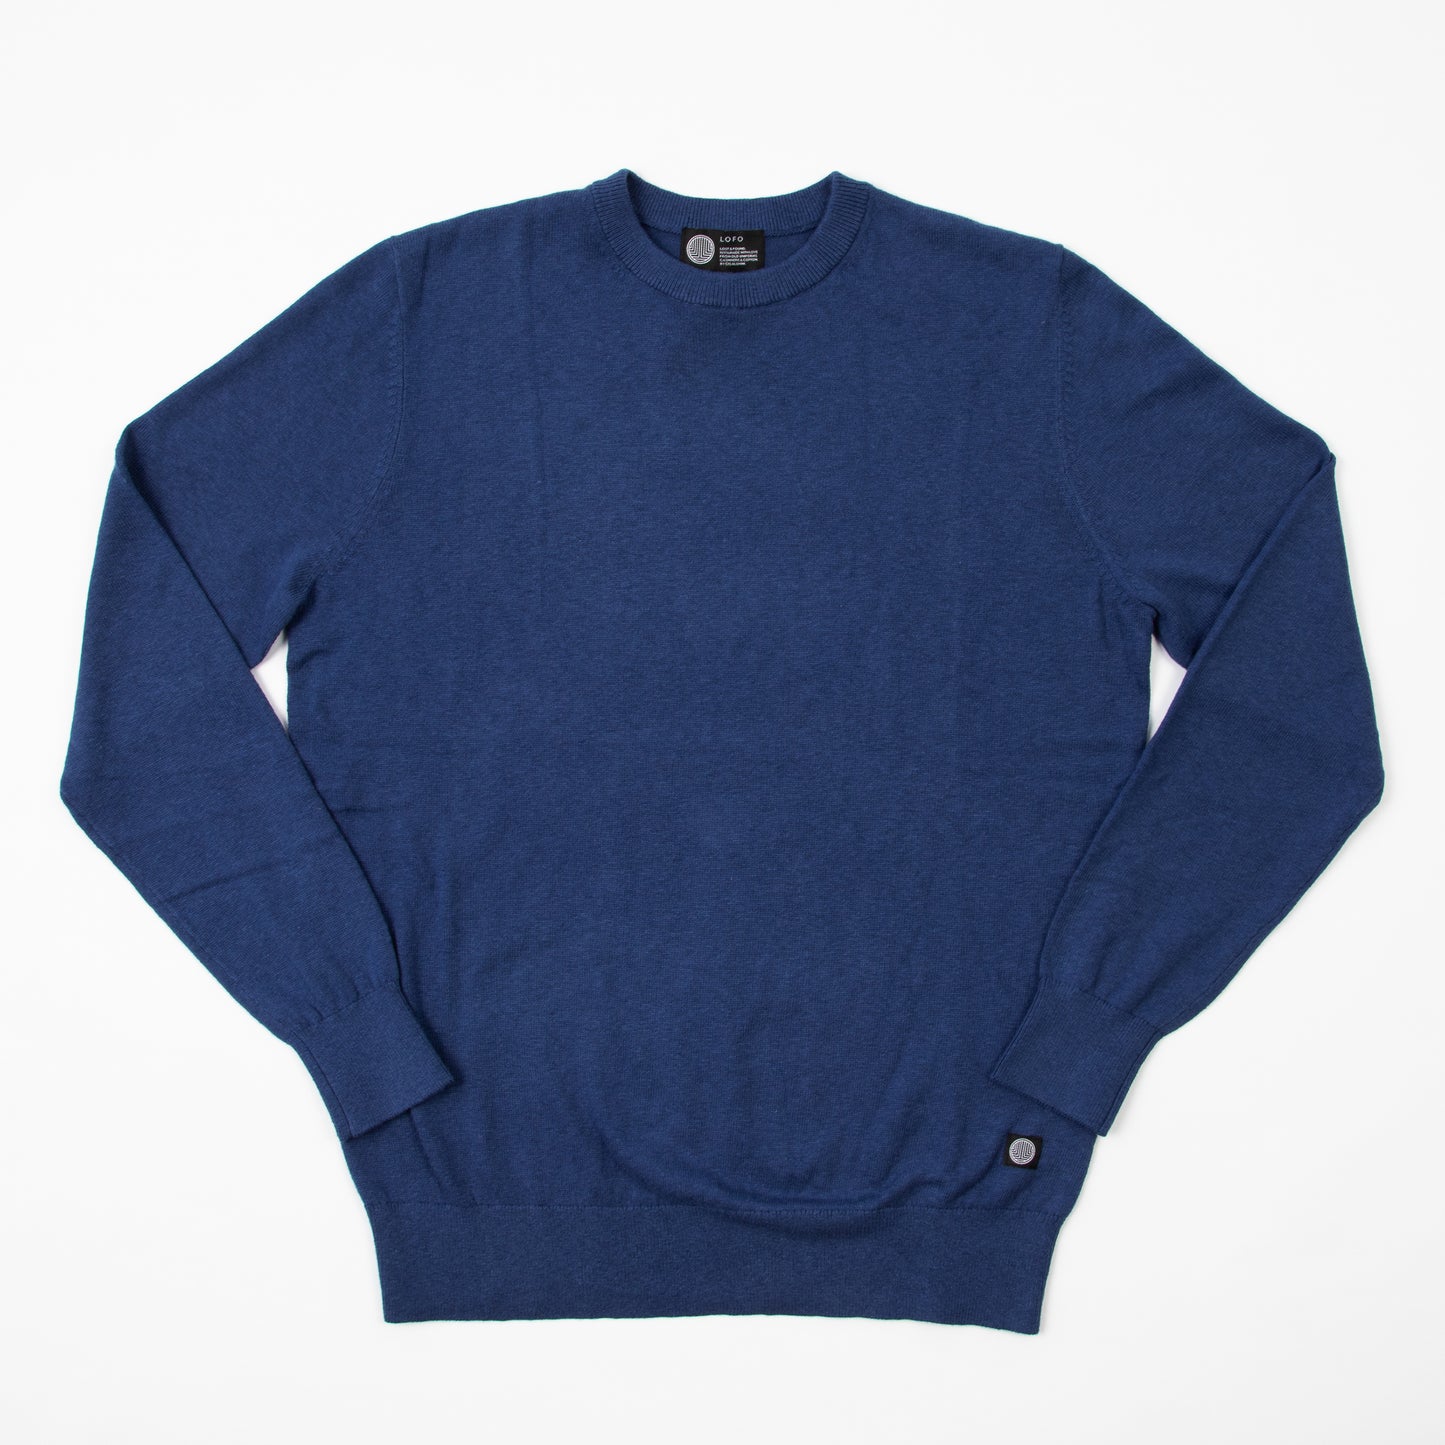 LOFO Cashmere & Upcycled Cotton Crewneck Sweater in Navy